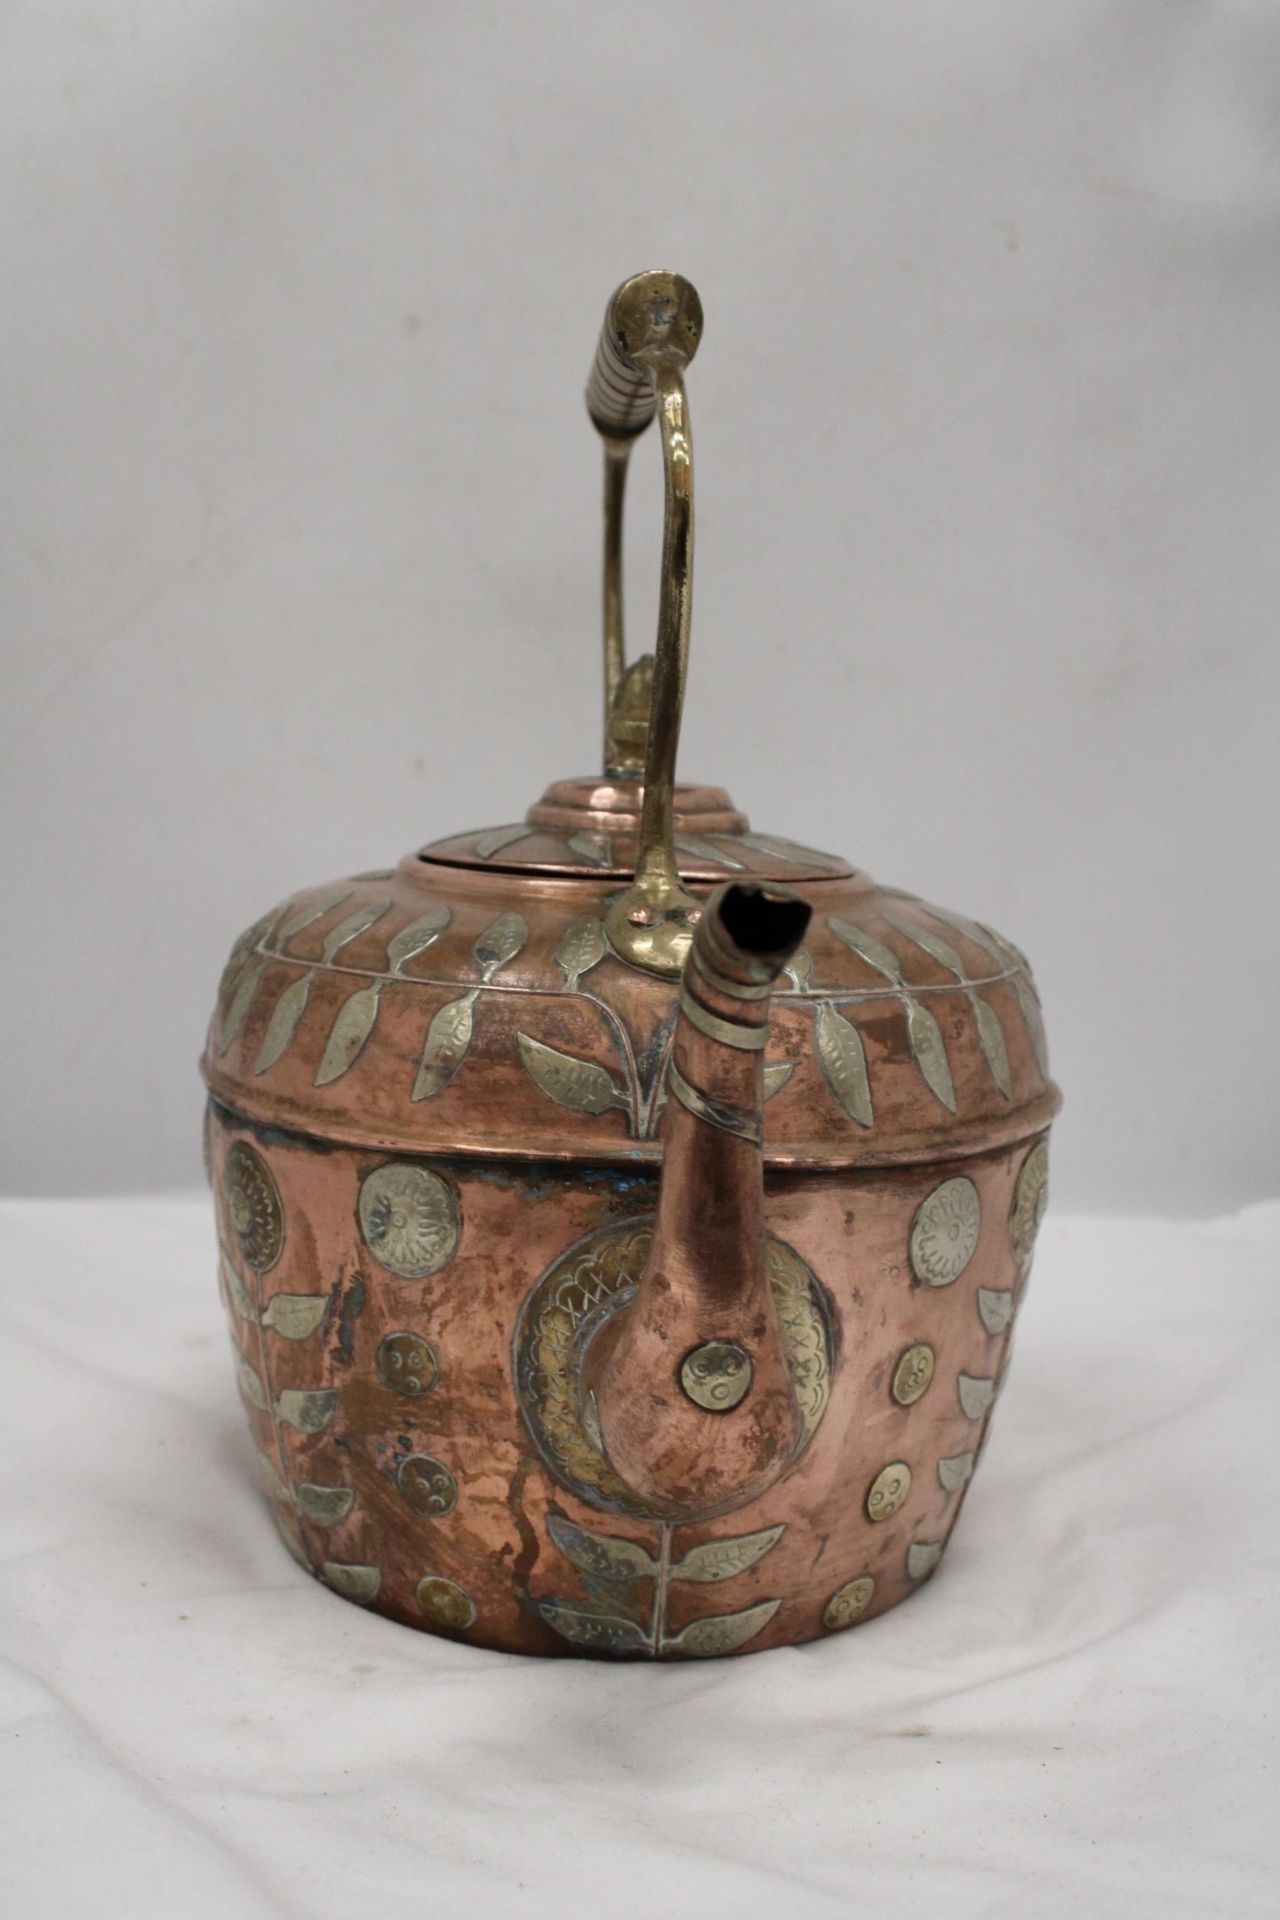 A 1900'S VICTORIAN COPPER KETTLE WITH BRASS FLORAL DETAIL - Image 3 of 5